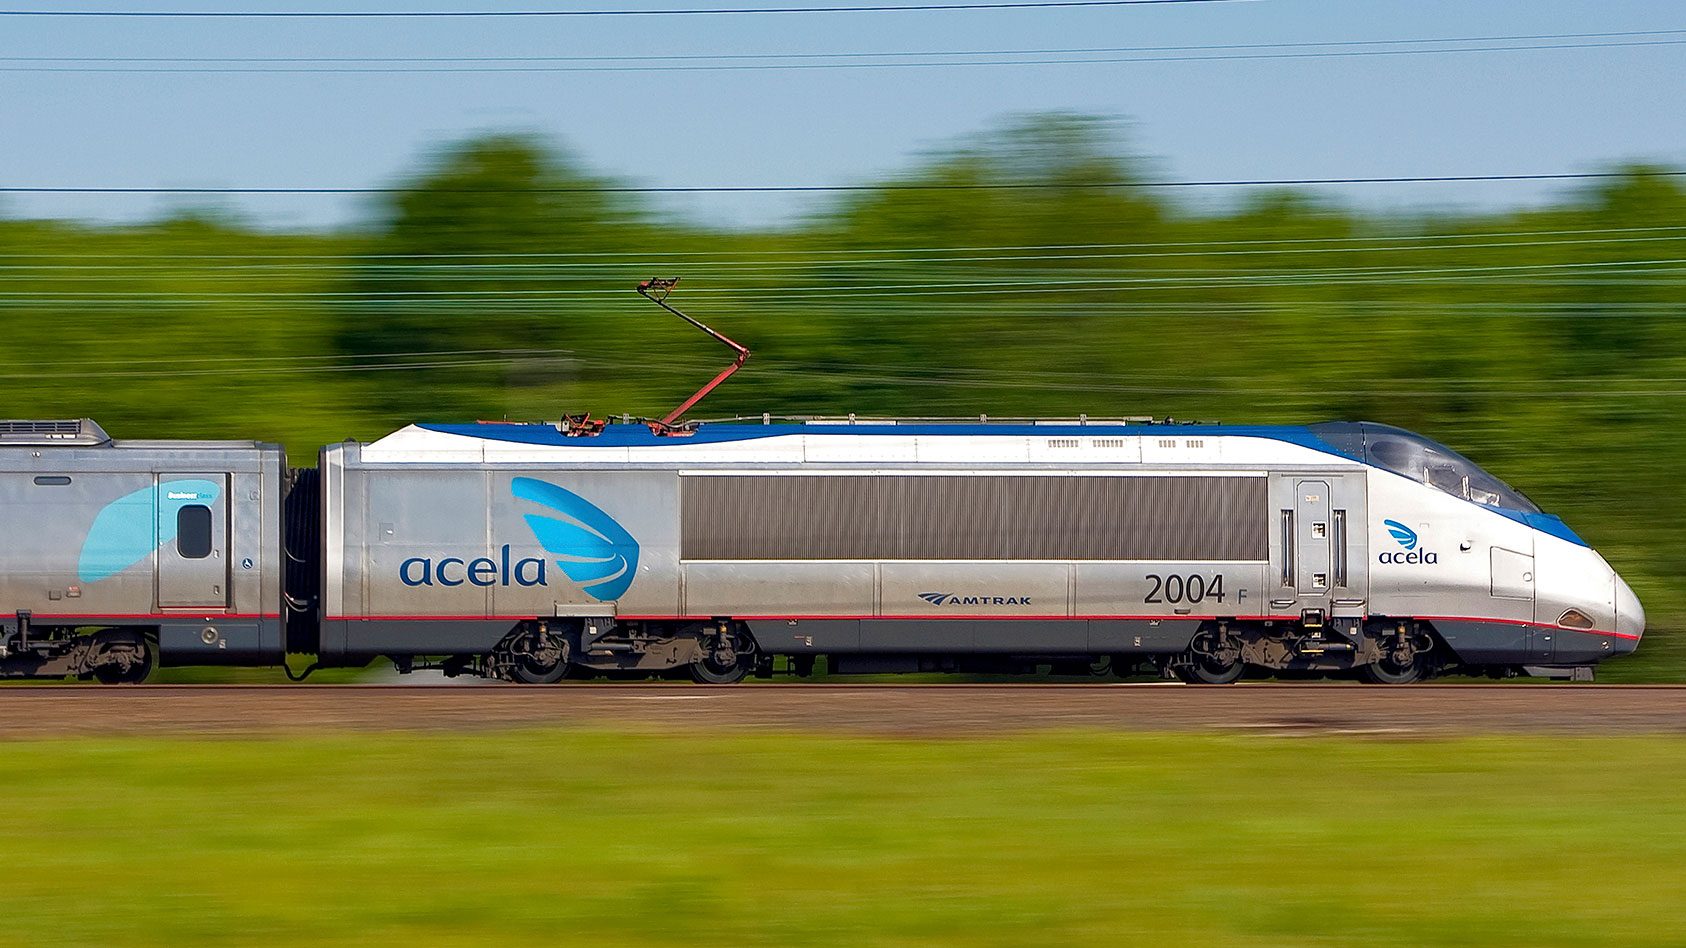 Amtrak's Acela Express high-speed train in action.